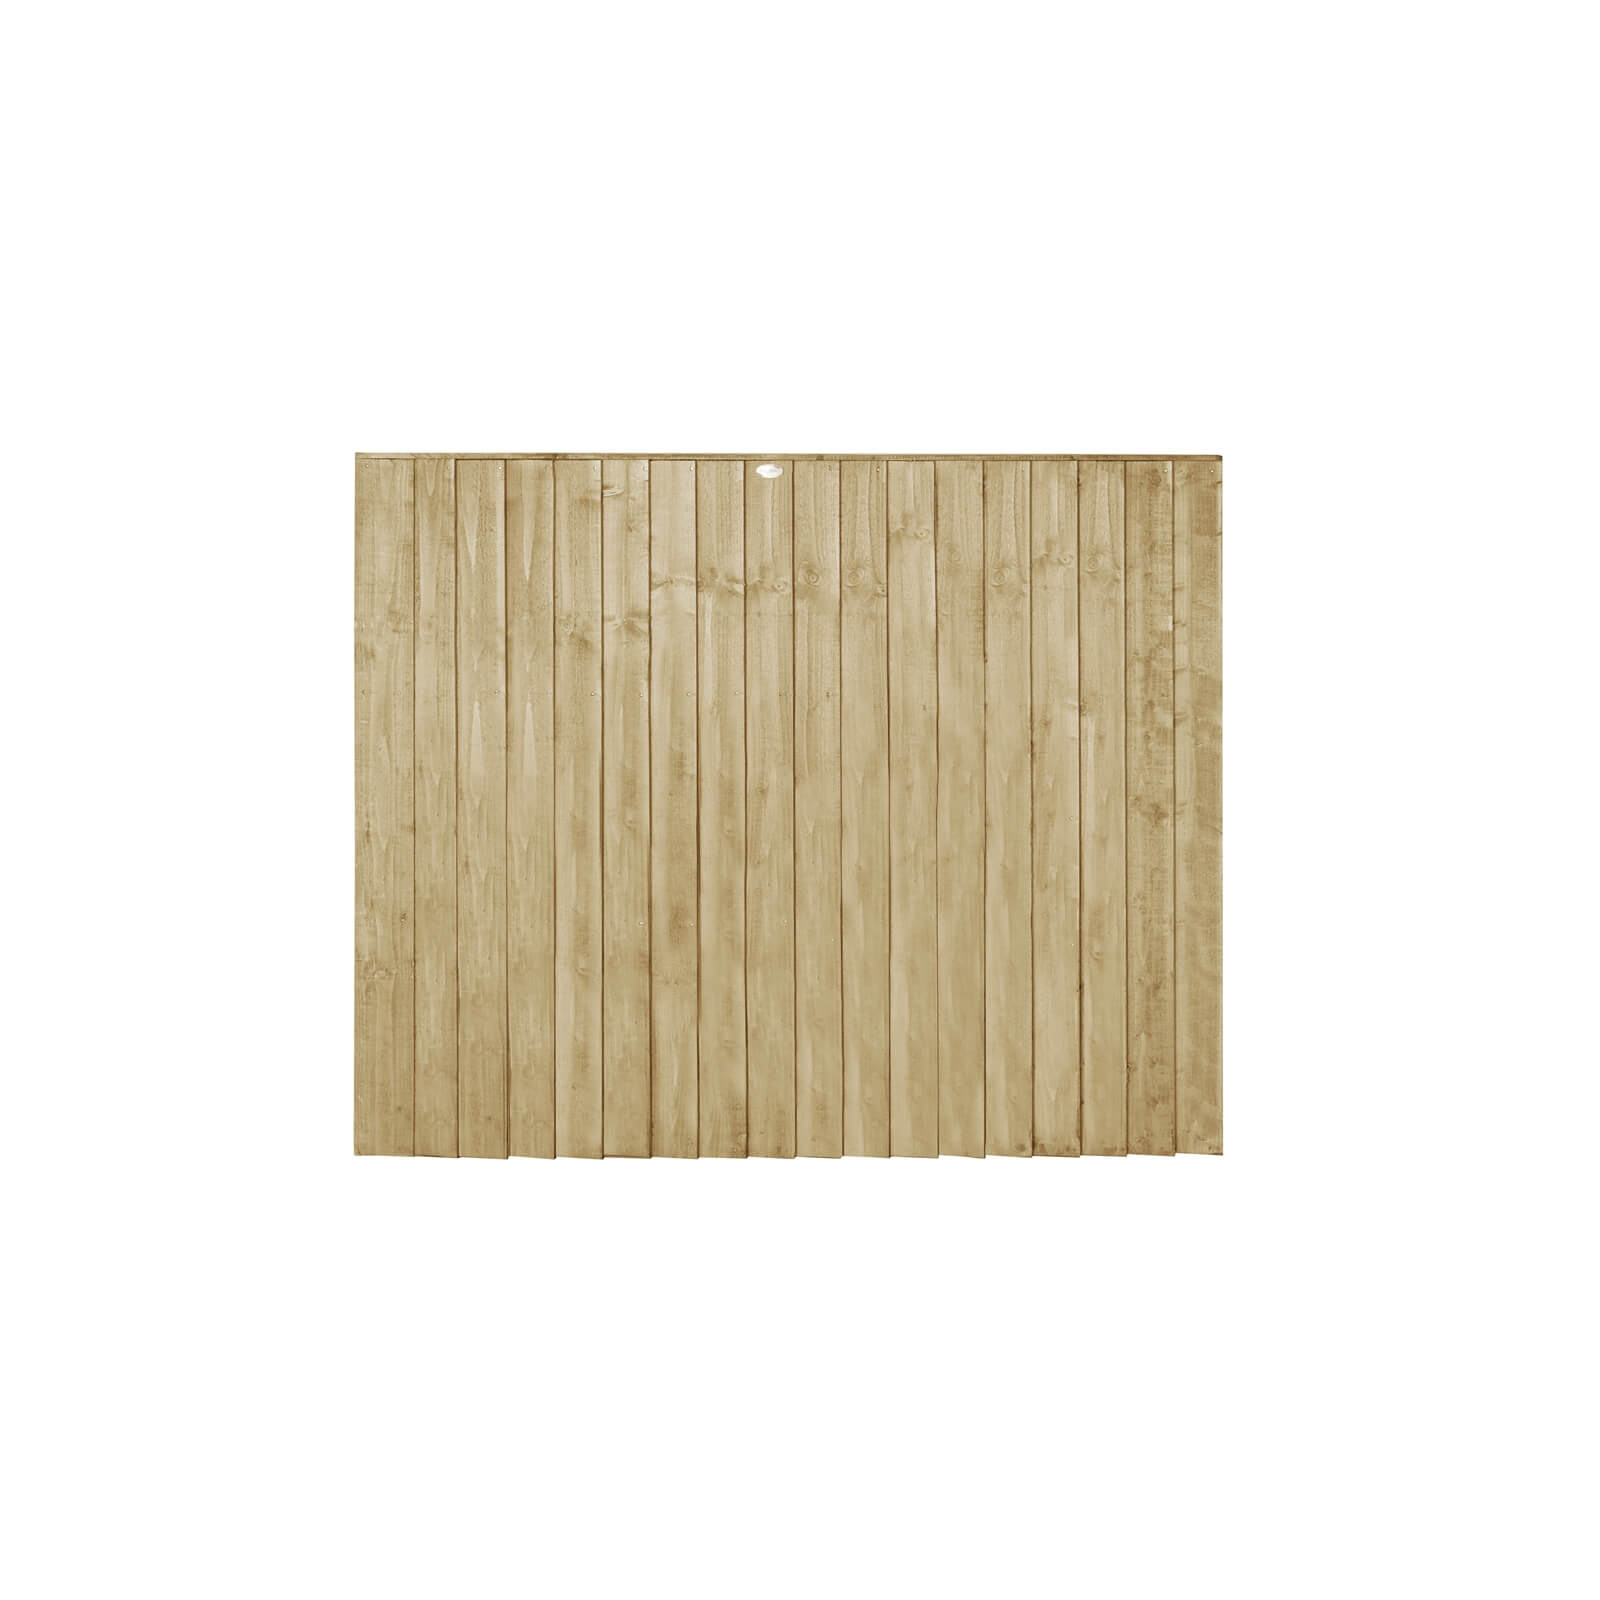 6ft x 5ft (1.83m x 1.54m) Pressure Treated Featheredge Fence Panel - Pack of 3